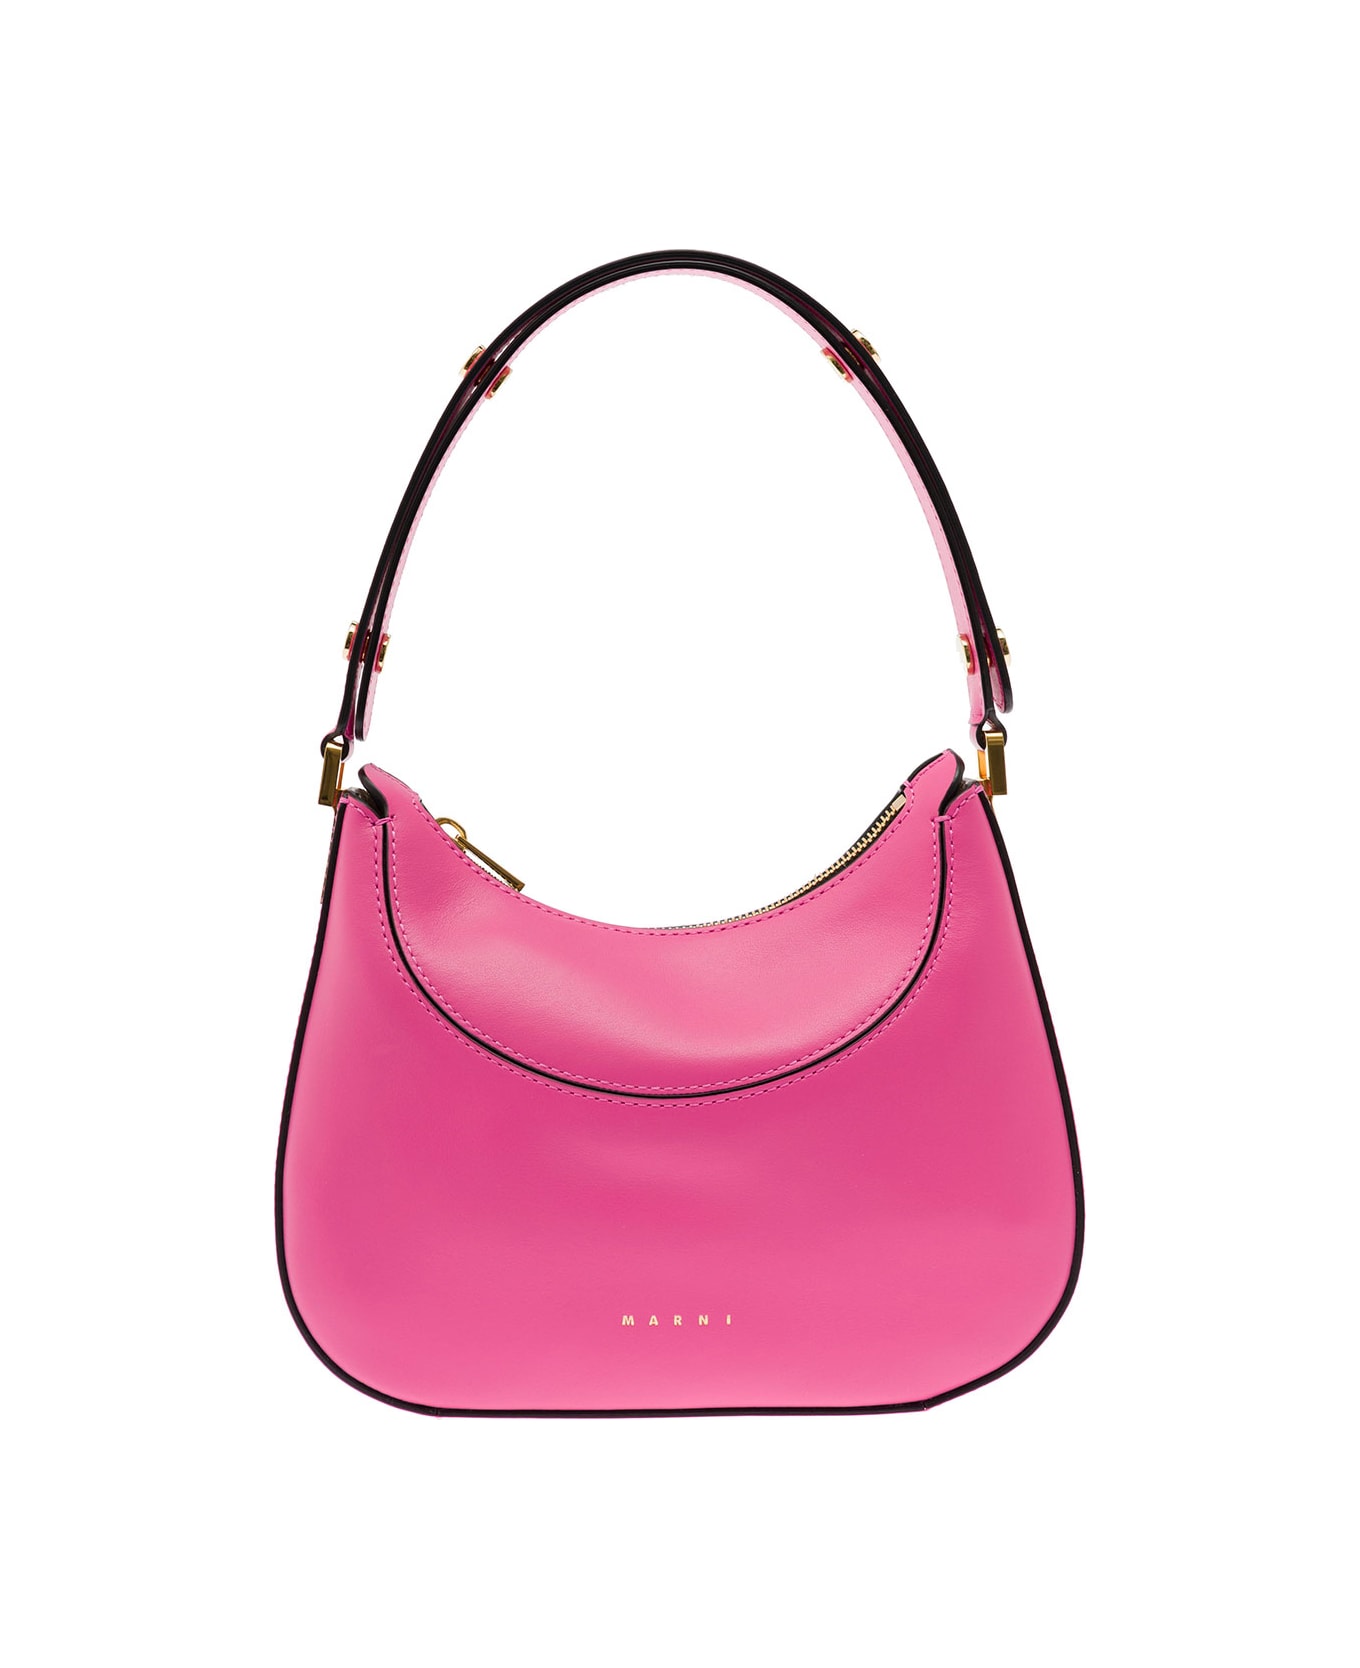 11 Trendy Hot Pink Handbags an Editor Loves | Who What Wear